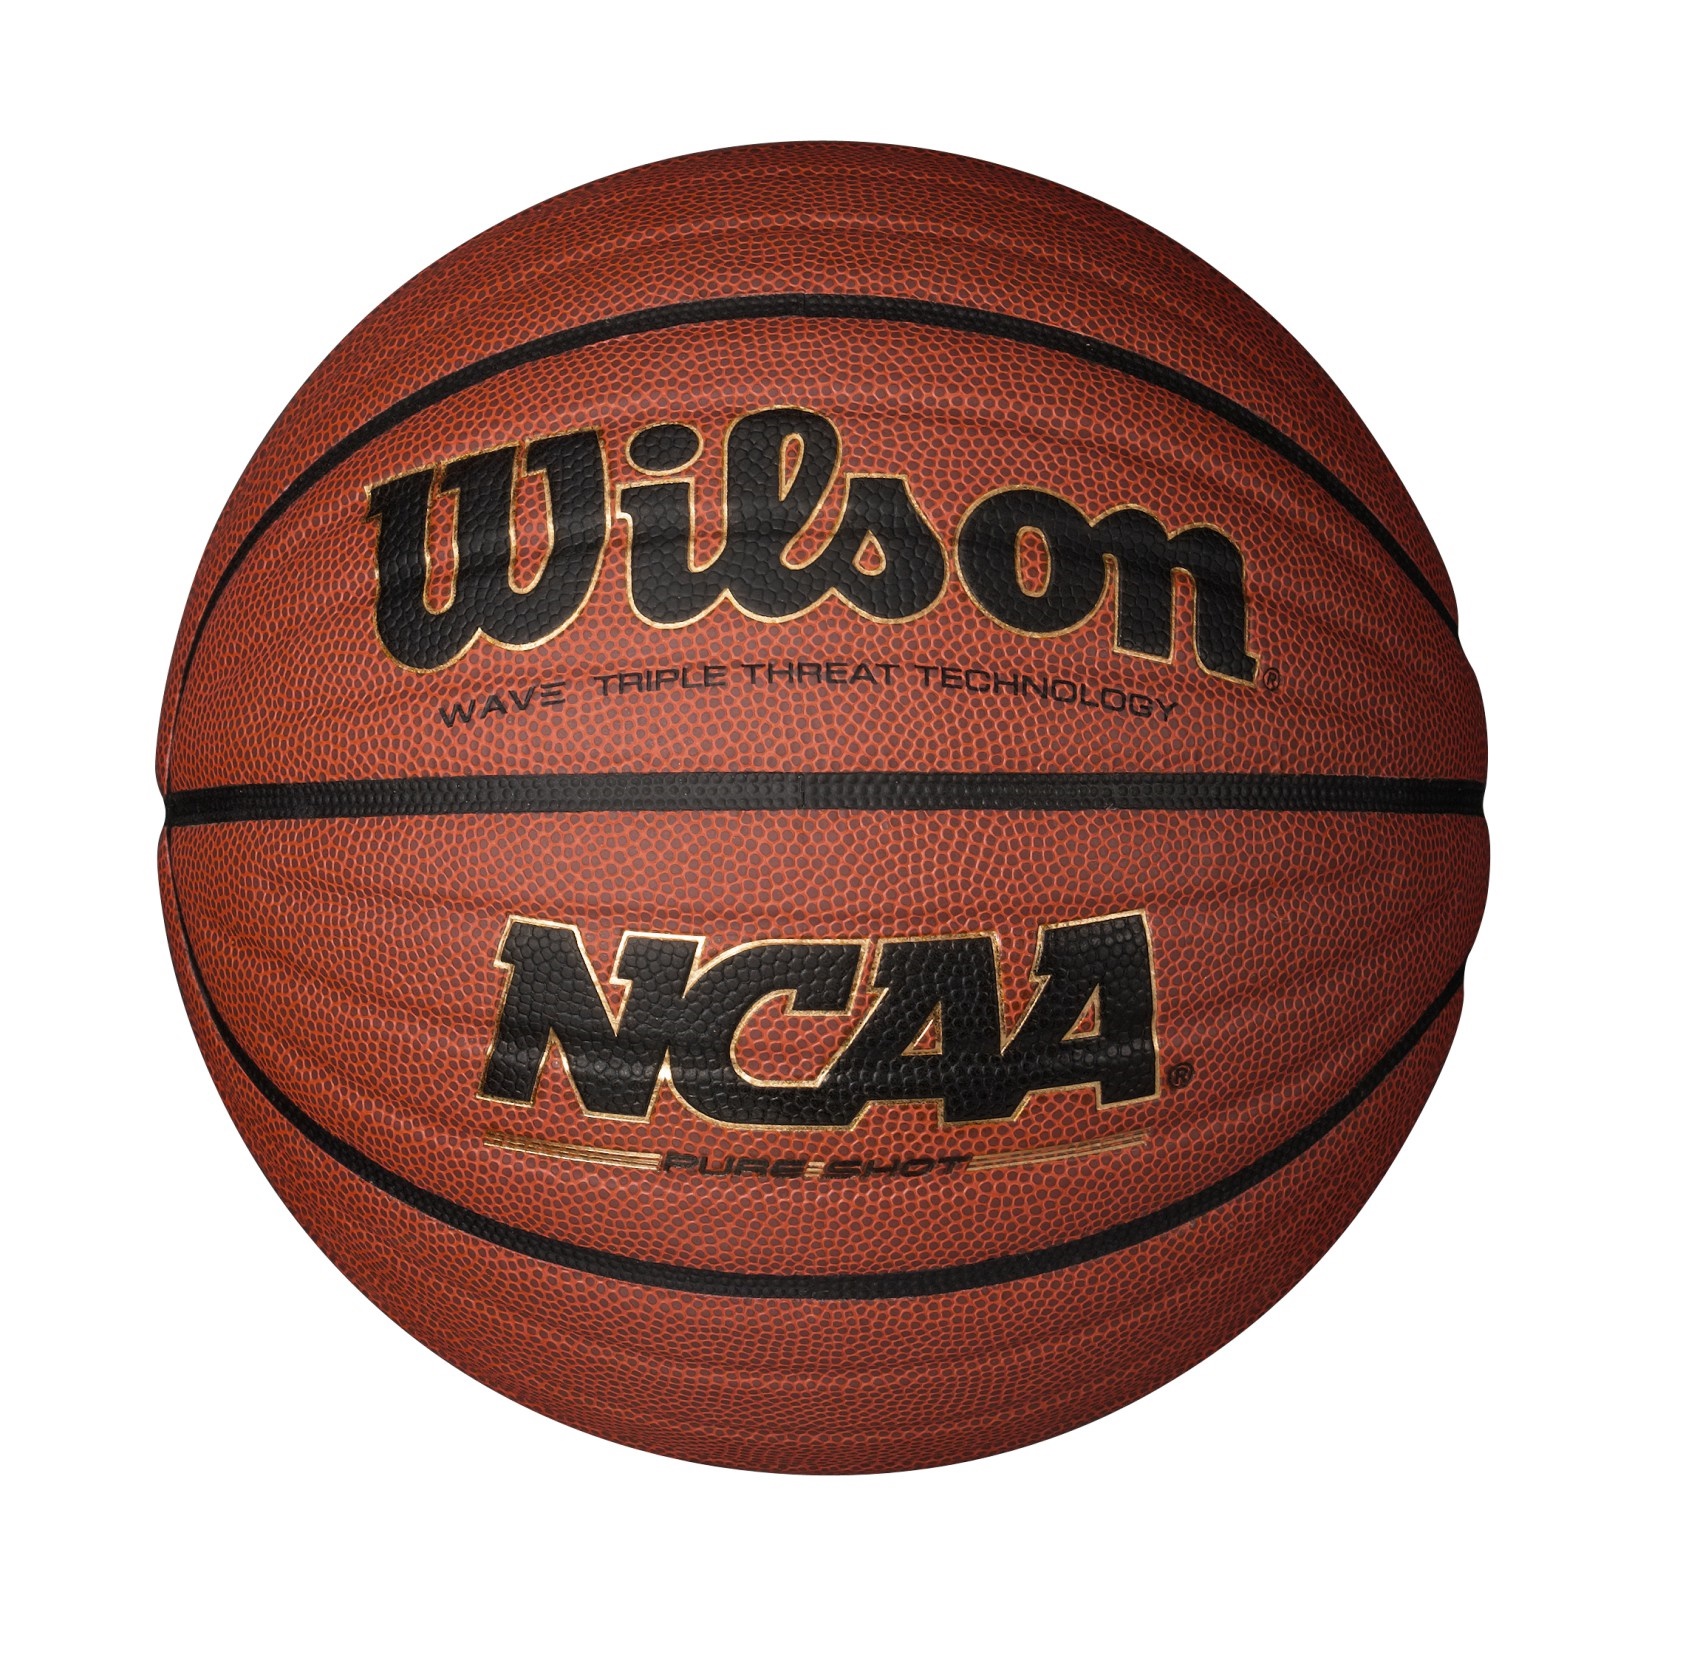 Wilson NCAA Wave Basketball, Official Size (29.5") - image 1 of 2